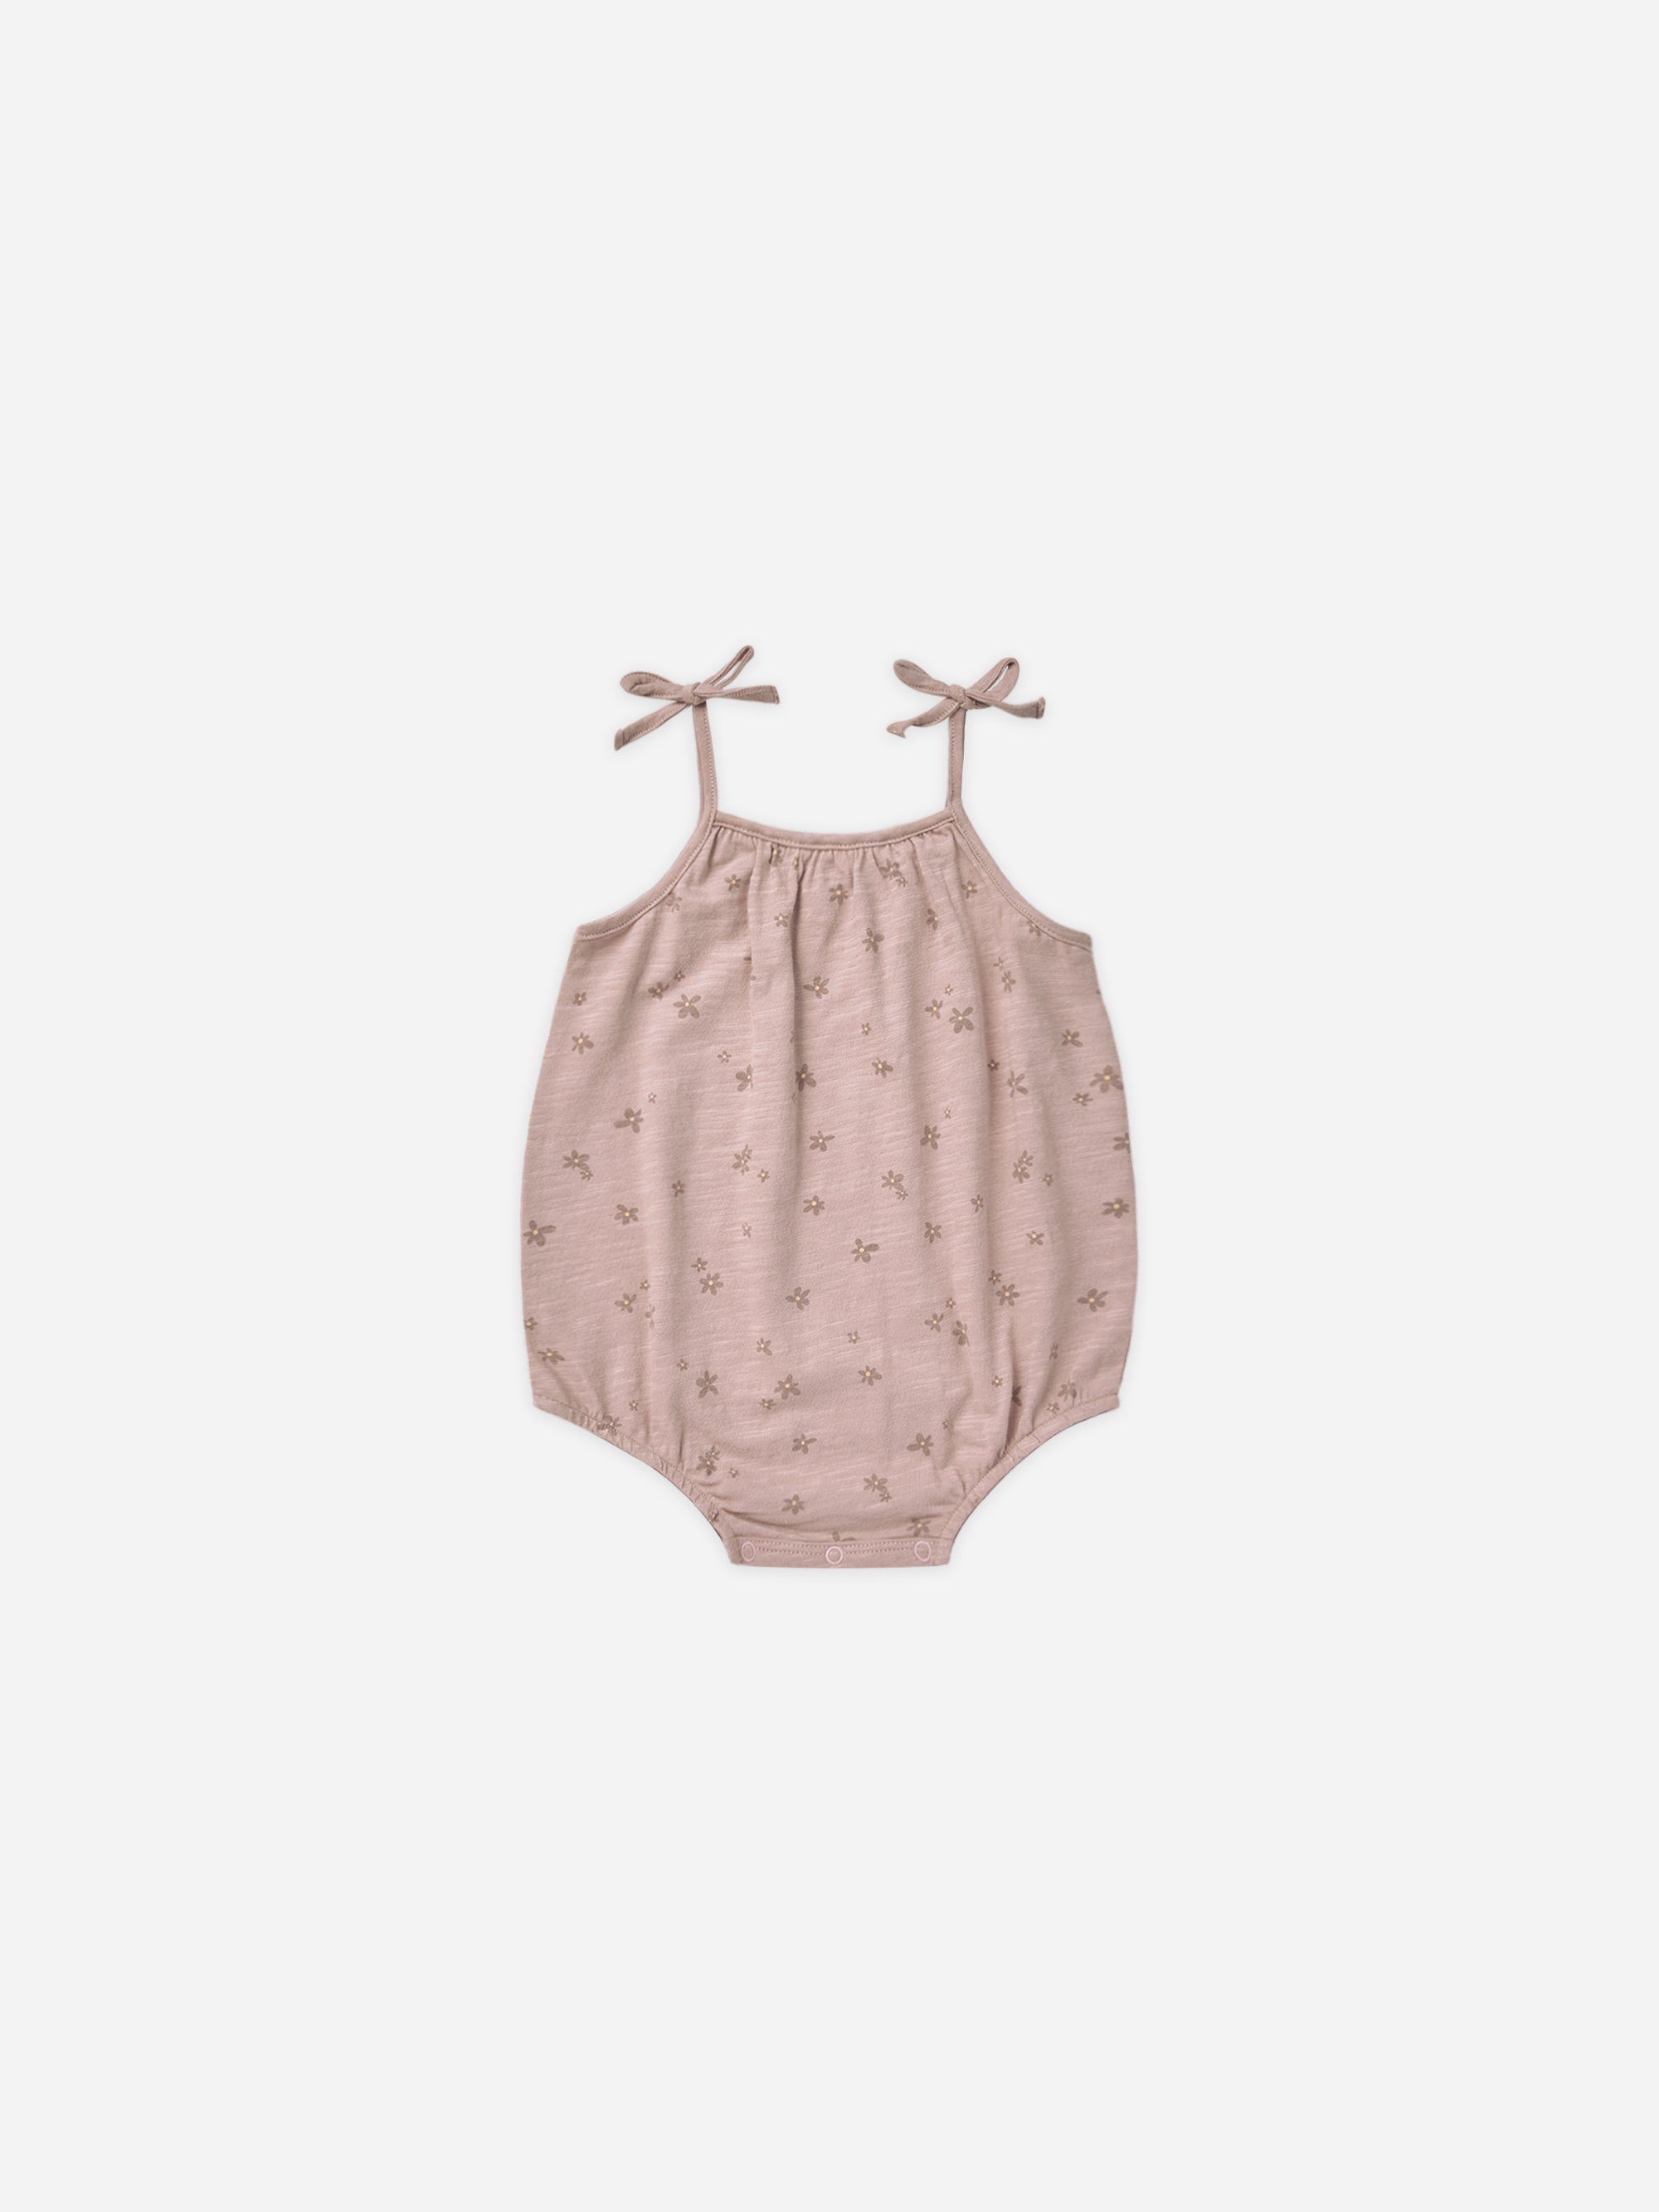 Nala Romper || Mauve Ditsy - Rylee + Cru | Kids Clothes | Trendy Baby Clothes | Modern Infant Outfits |